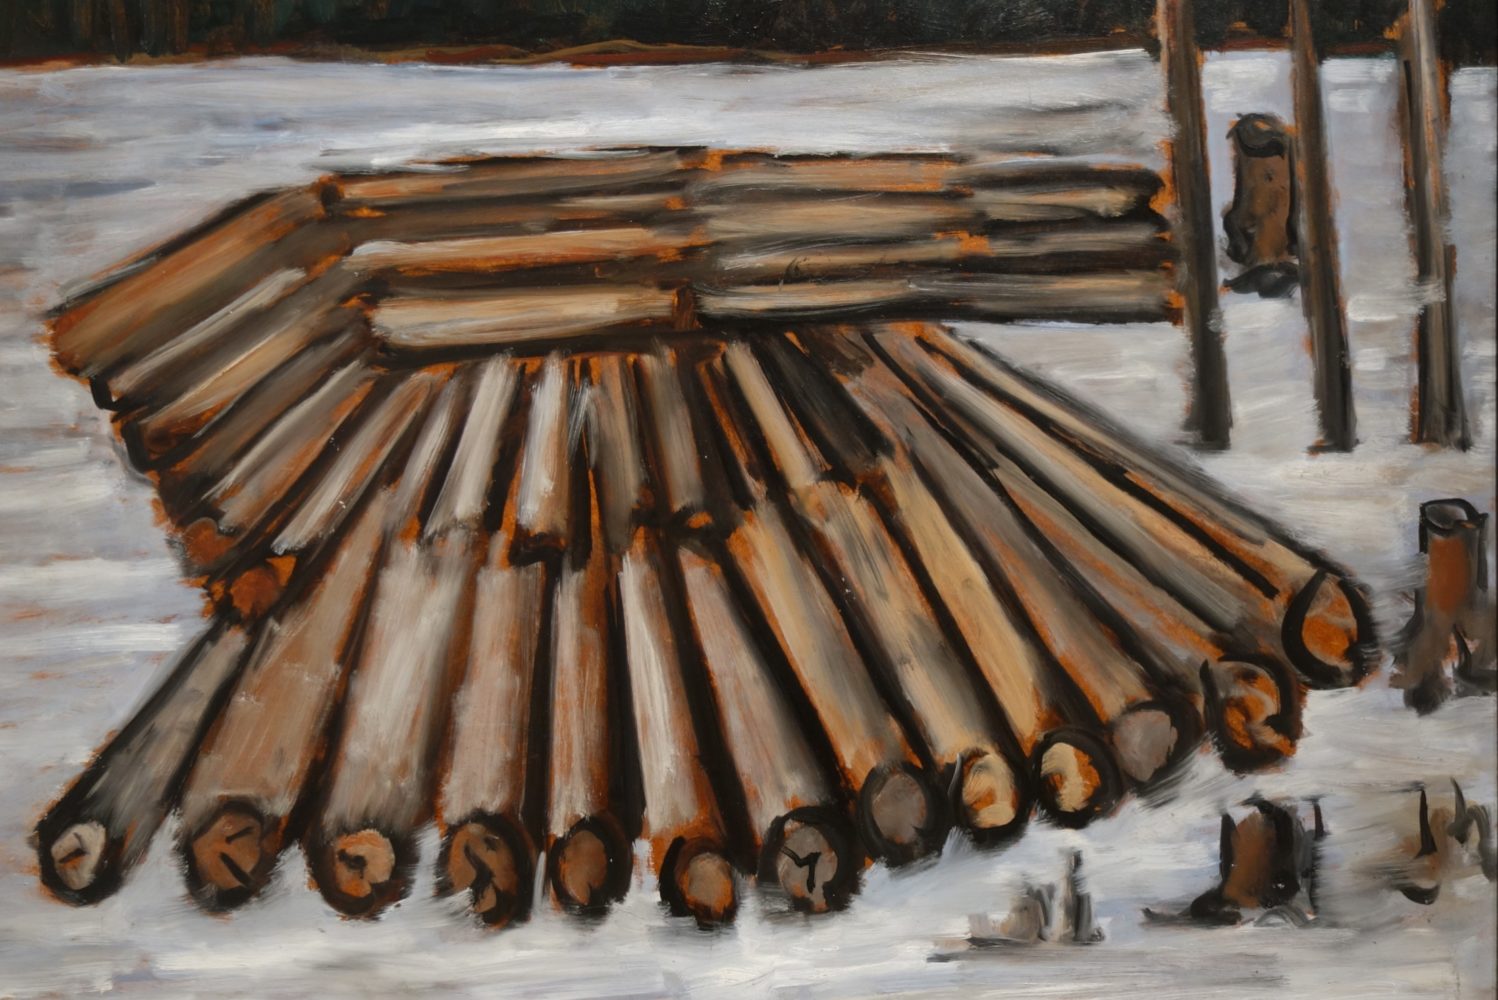 Marsden Hartley Log Industry painting from Maine show at Met Breuer